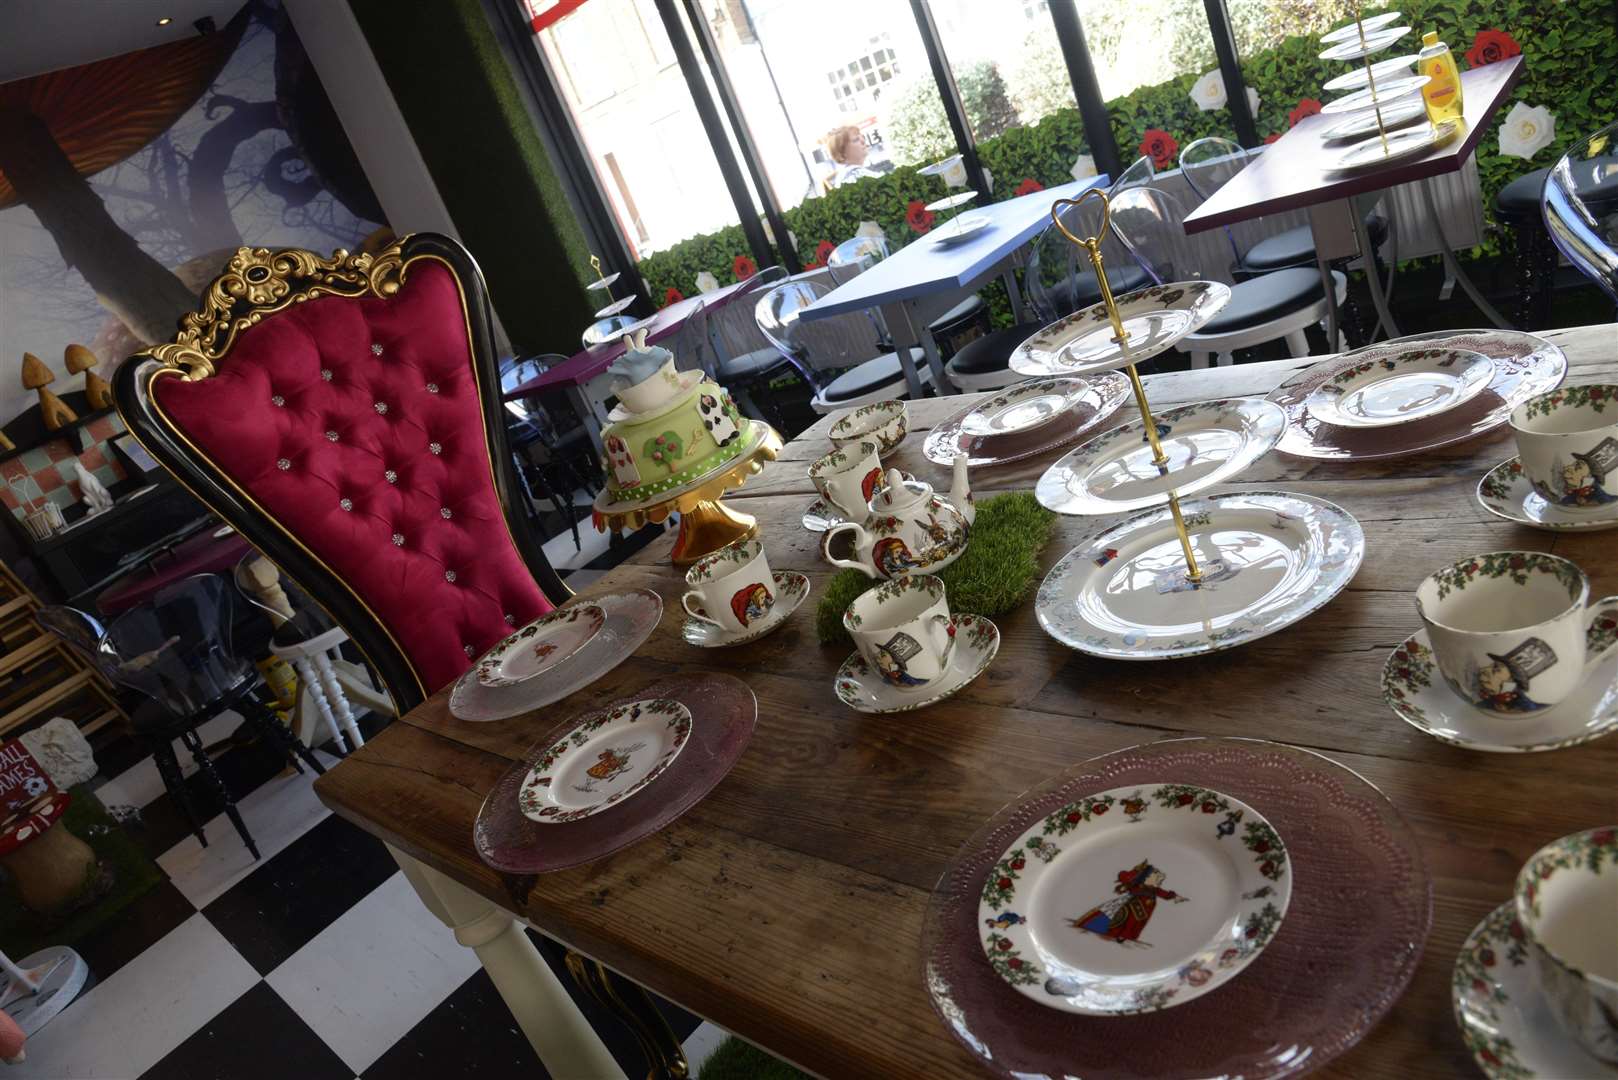 The Alice in Wonderland themed tea room in Herne Bay. Picture: Chris Davey